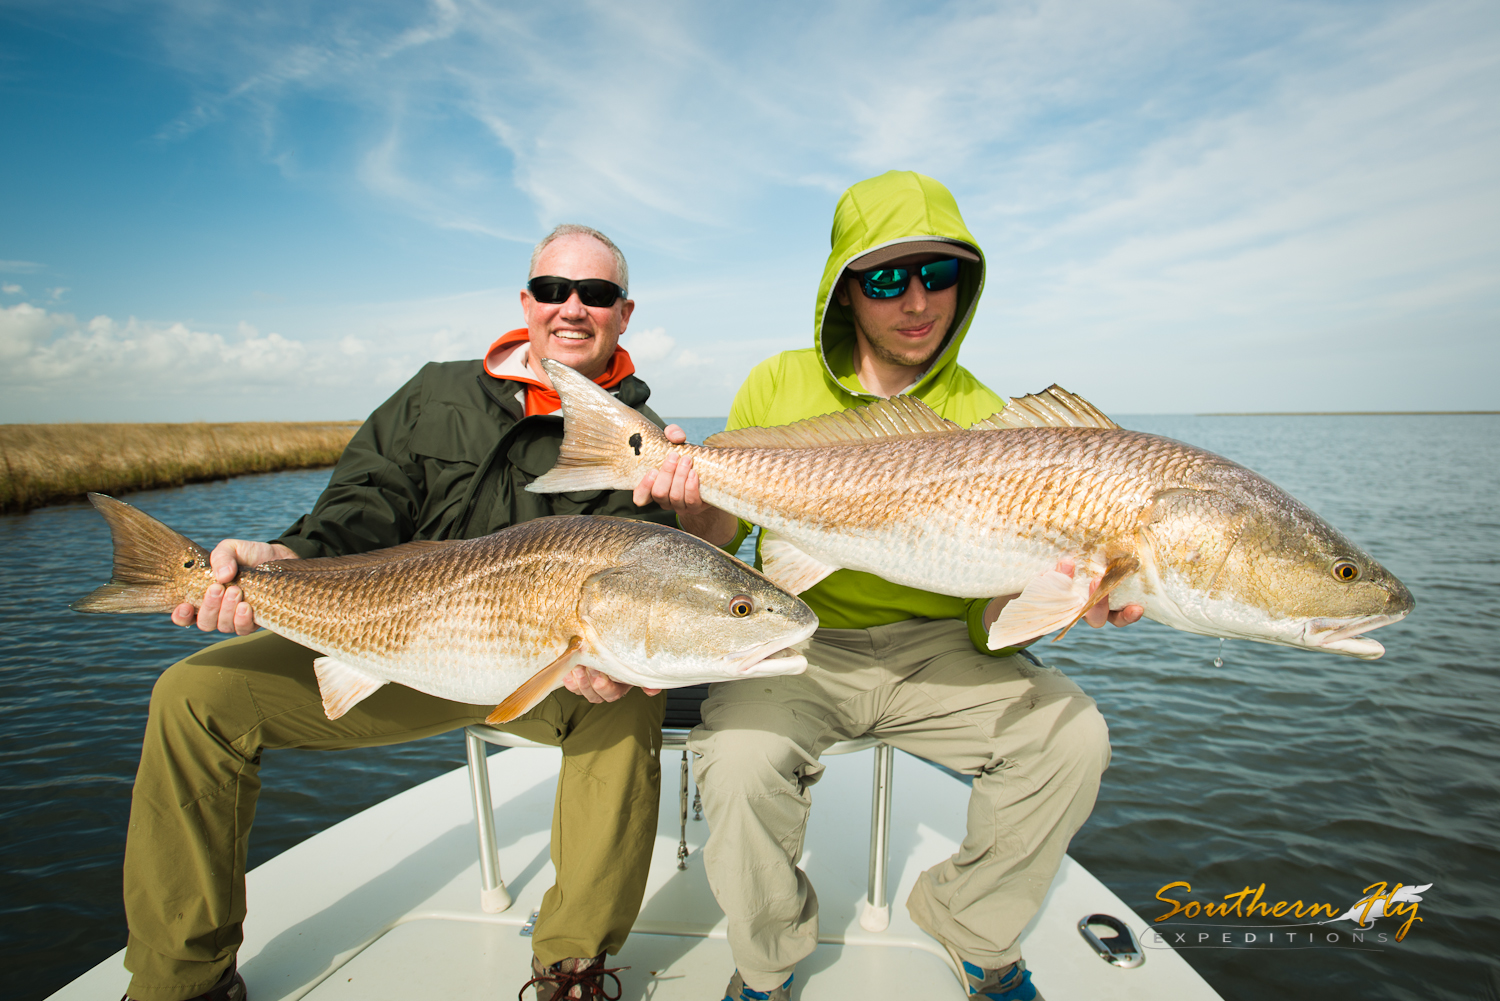 Fly fishing hopedale louisiana with captain brandon keck and southern fly expeditions of Louisiana 